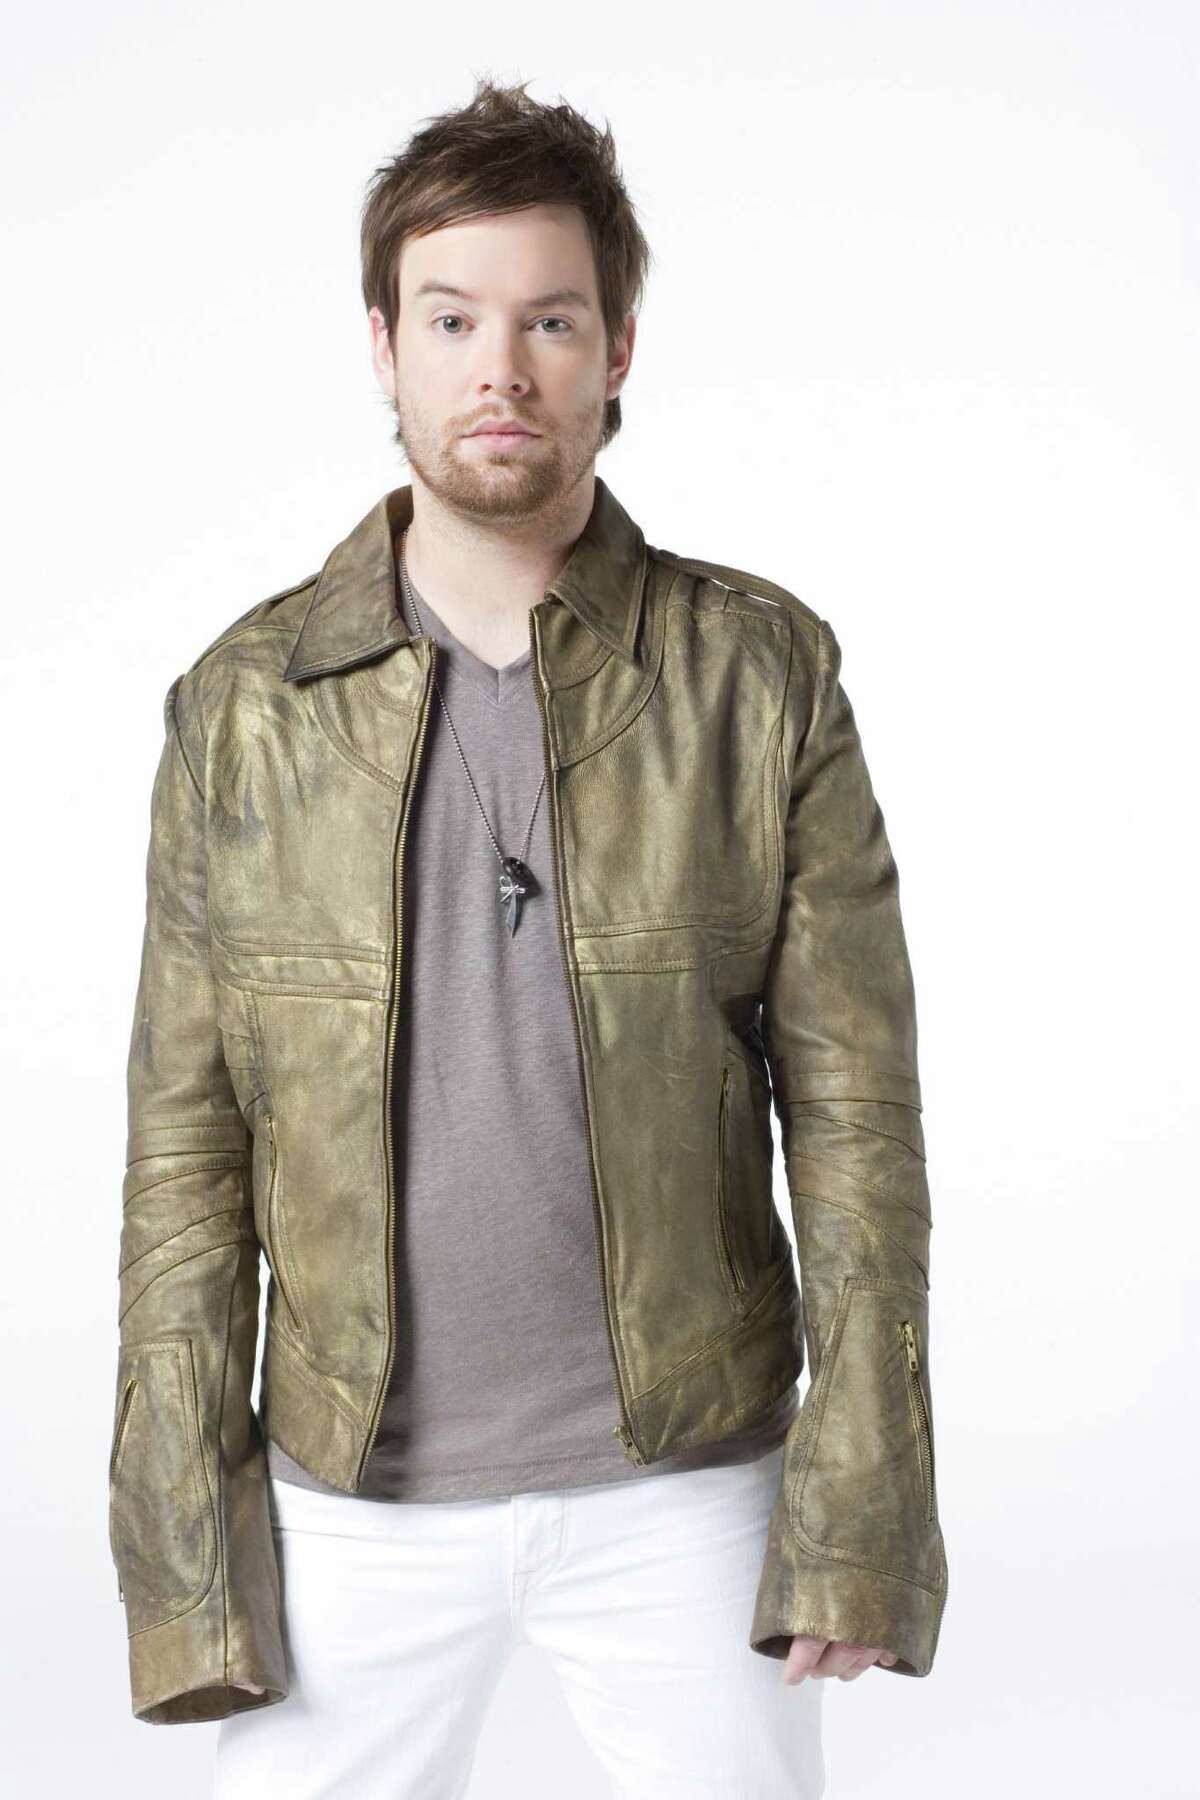 American Idol winner David Cook was born in Houston but doesn't remember the city very well. He's hoping to reconnect with his roots during a local stop on the Idols tour. He grew up in Blue Springs, MO. Photo courtesy of 19 Entertainment